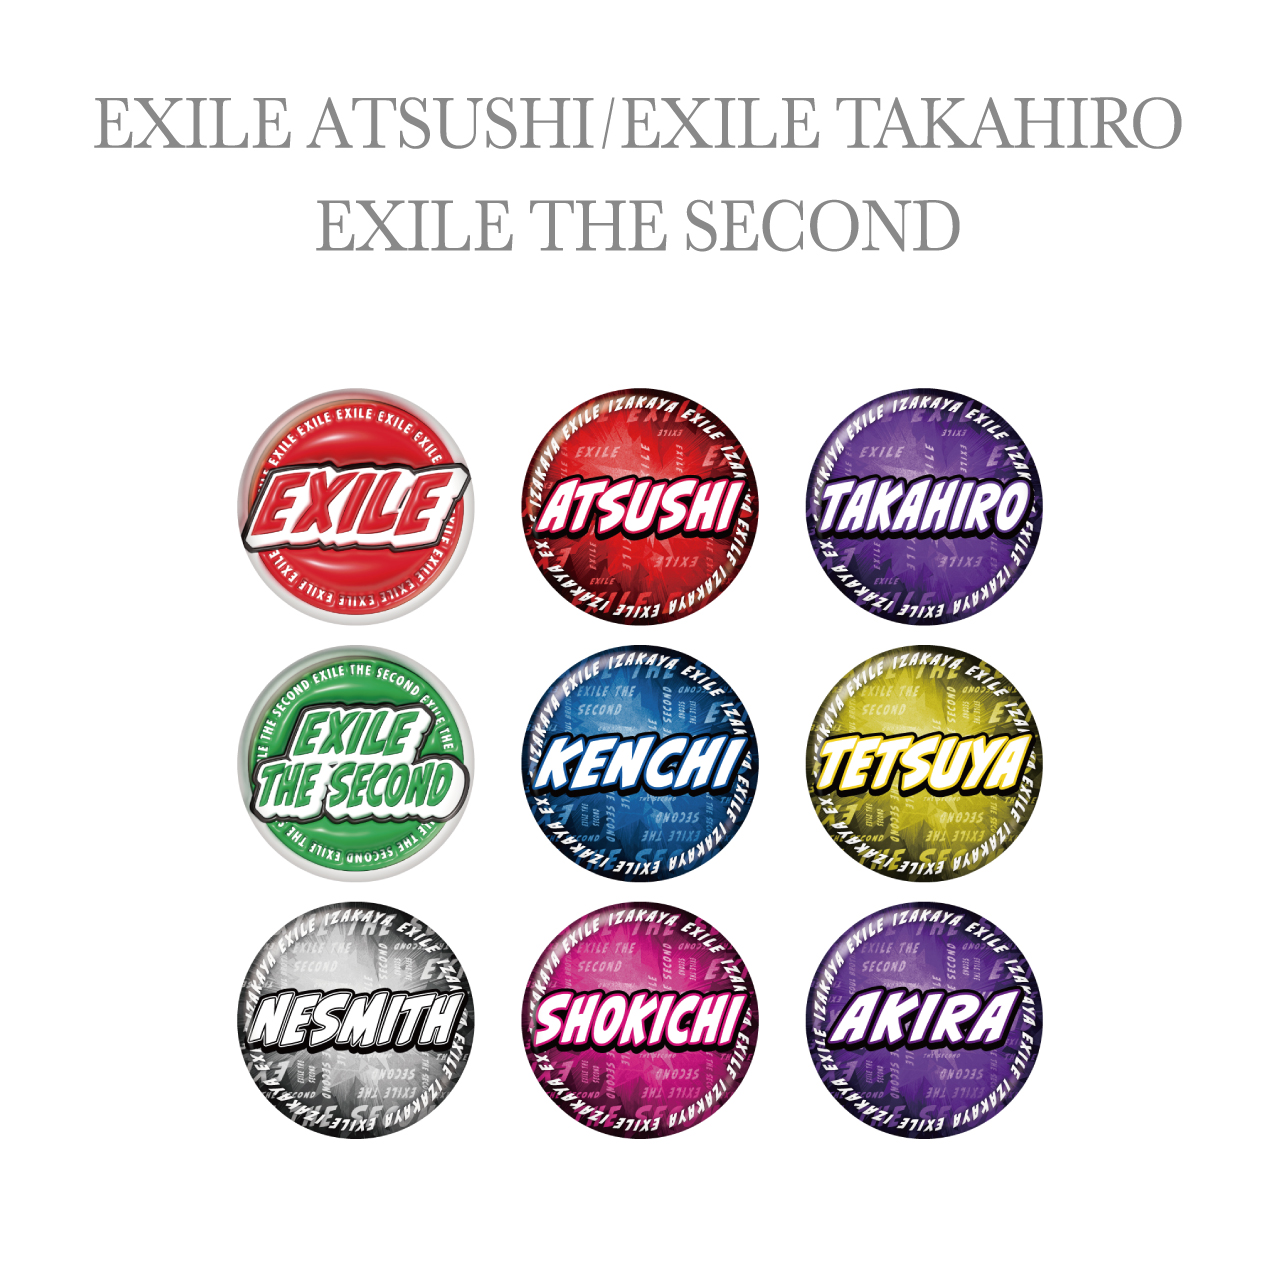 EXILE THE SECOND 缶バッジチケット